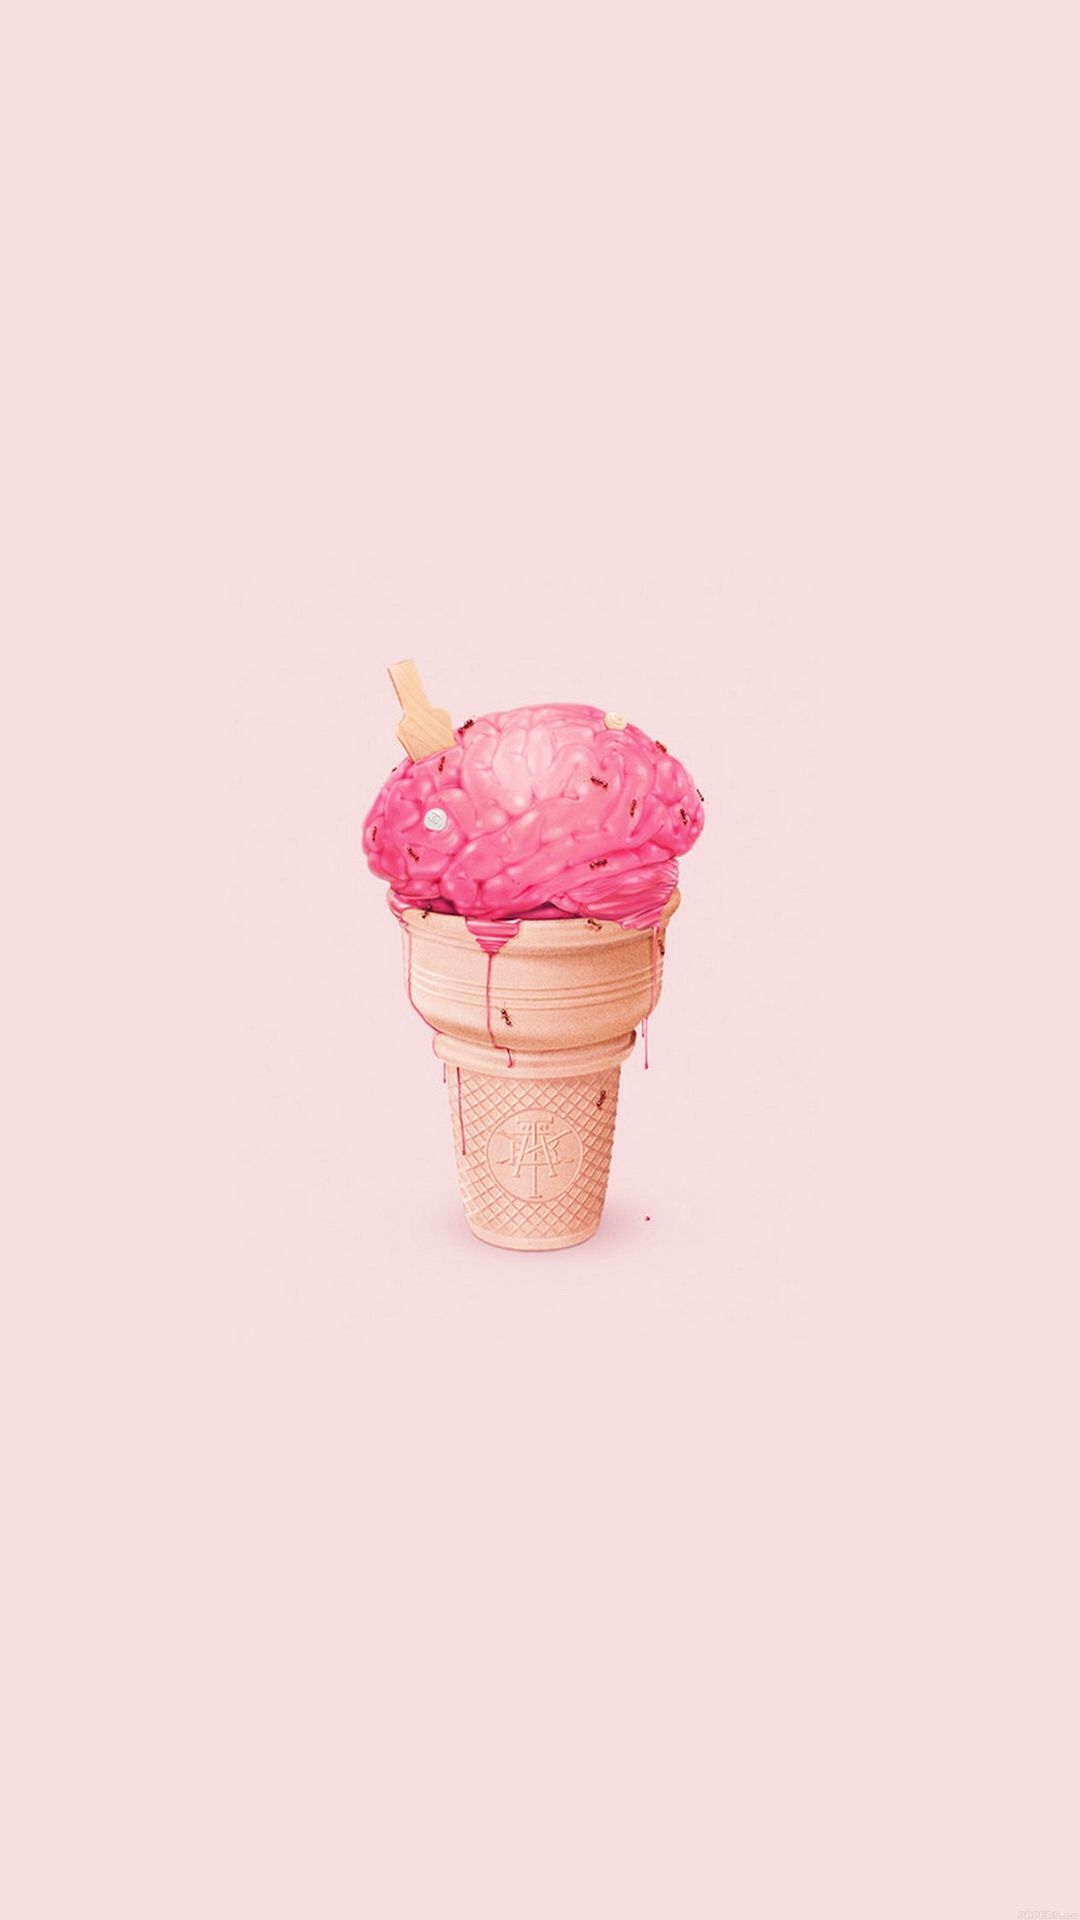 Ice Cream Wallpapers Iphone posted by Michelle Simpson